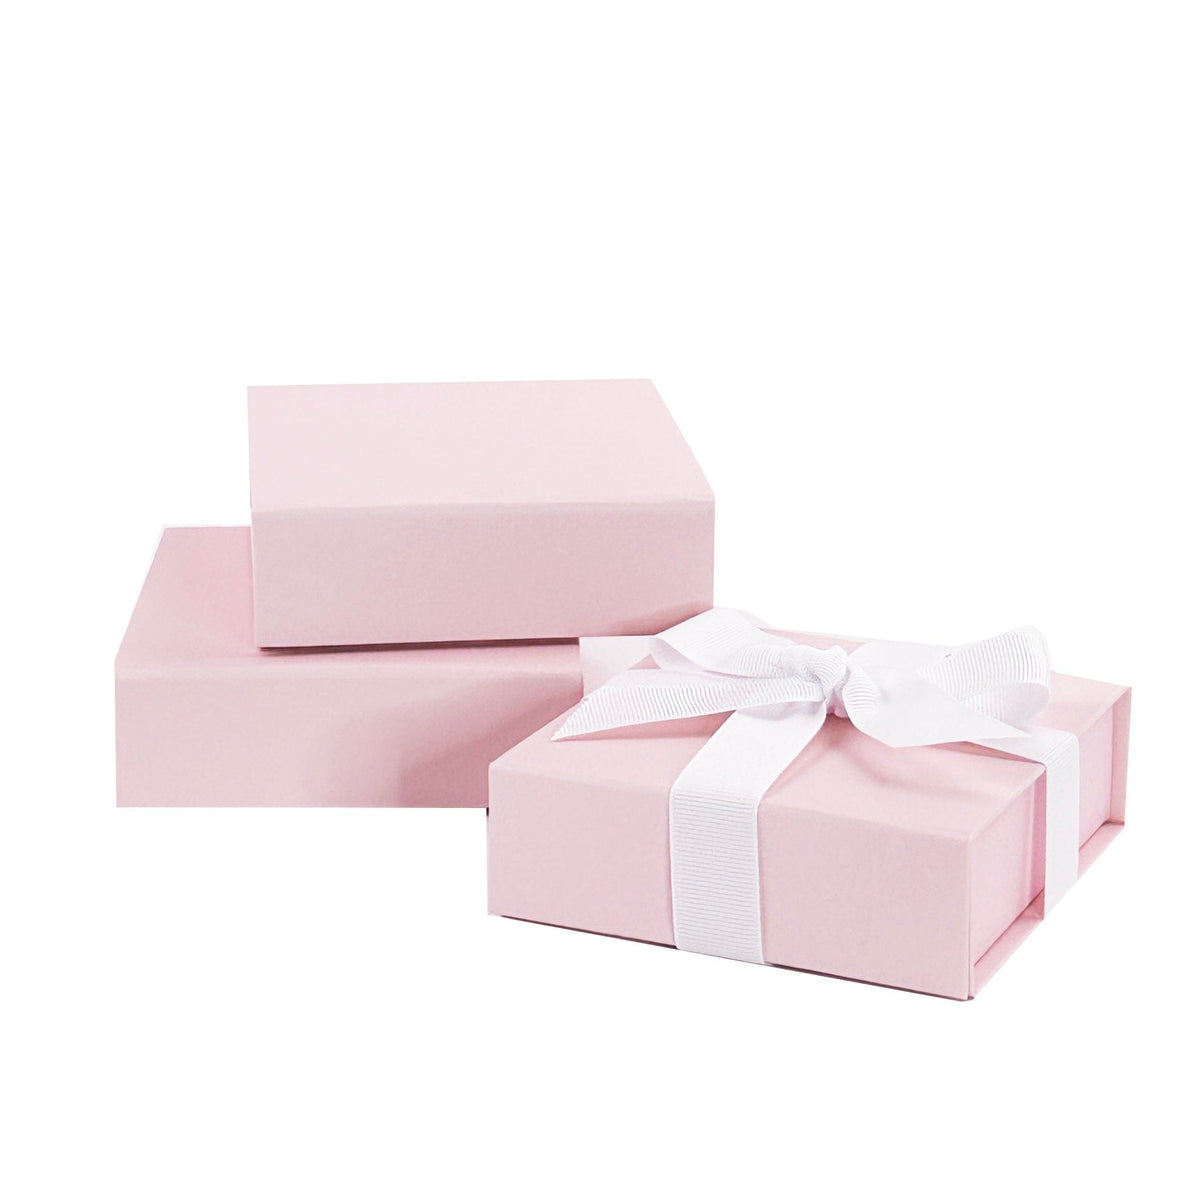 Sample - Powder Pink Small Square Magnetic Gift Boxes